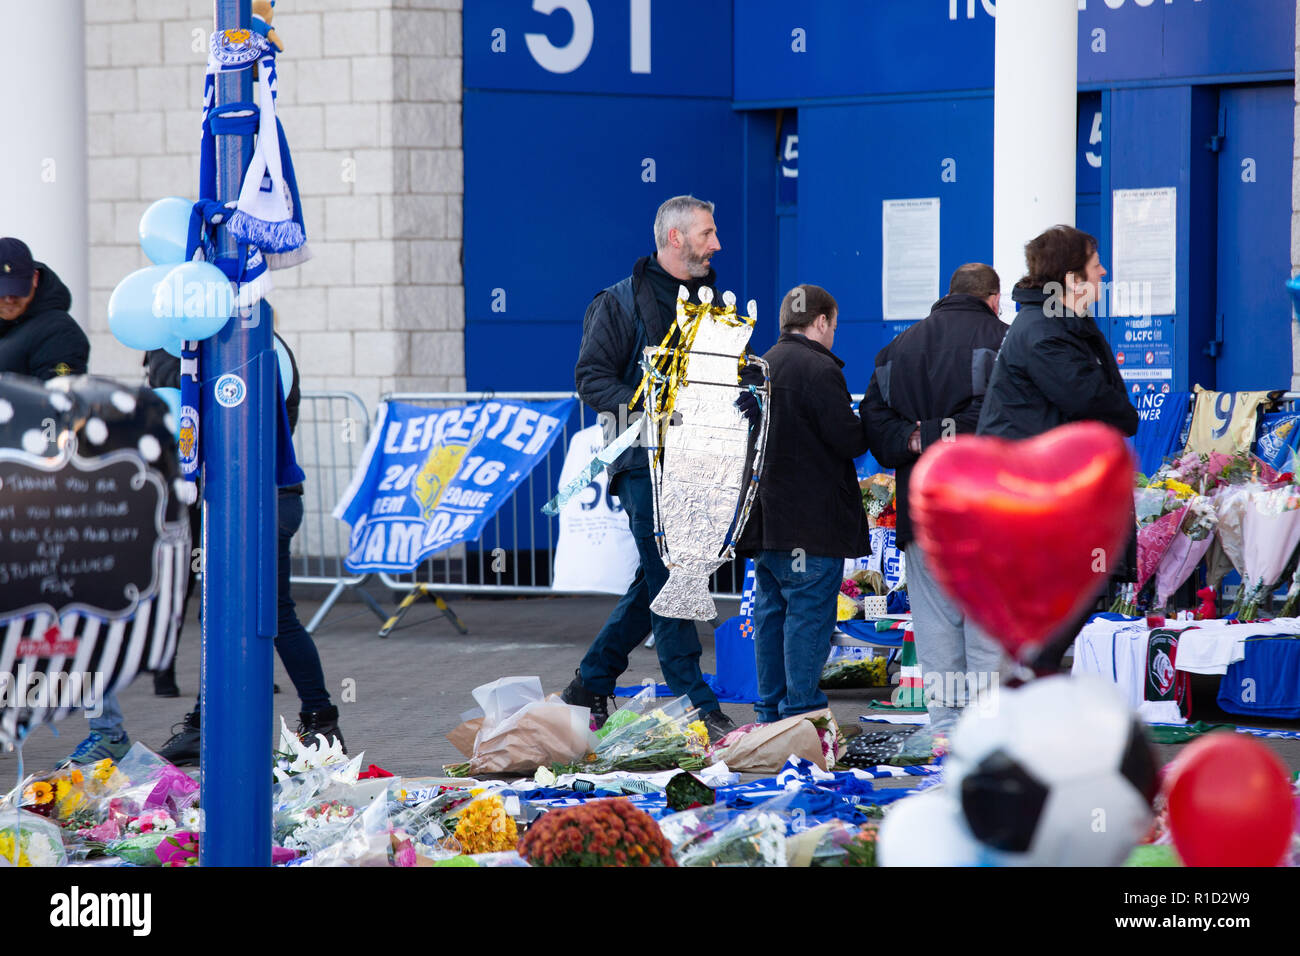 Leicester City Football fans paying their respects outside the stadium after the death of owner Vichai Srivaddhanaprabha in a helicopter crash. Stock Photo